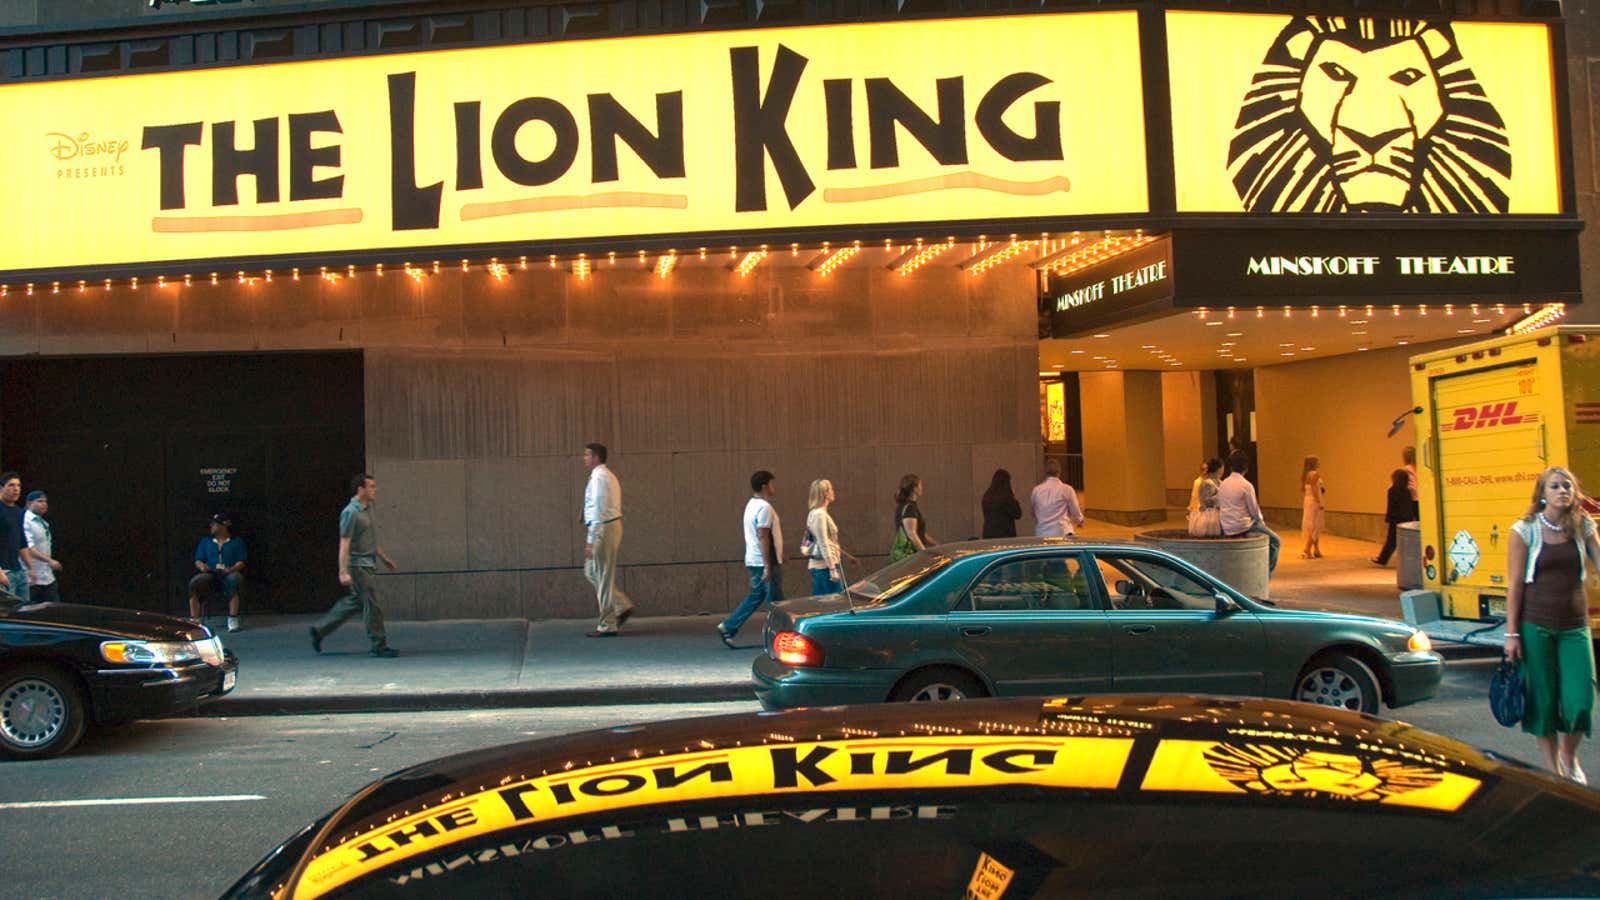 This isn’t the first trouble ‘The Lion King’ has given Disney.